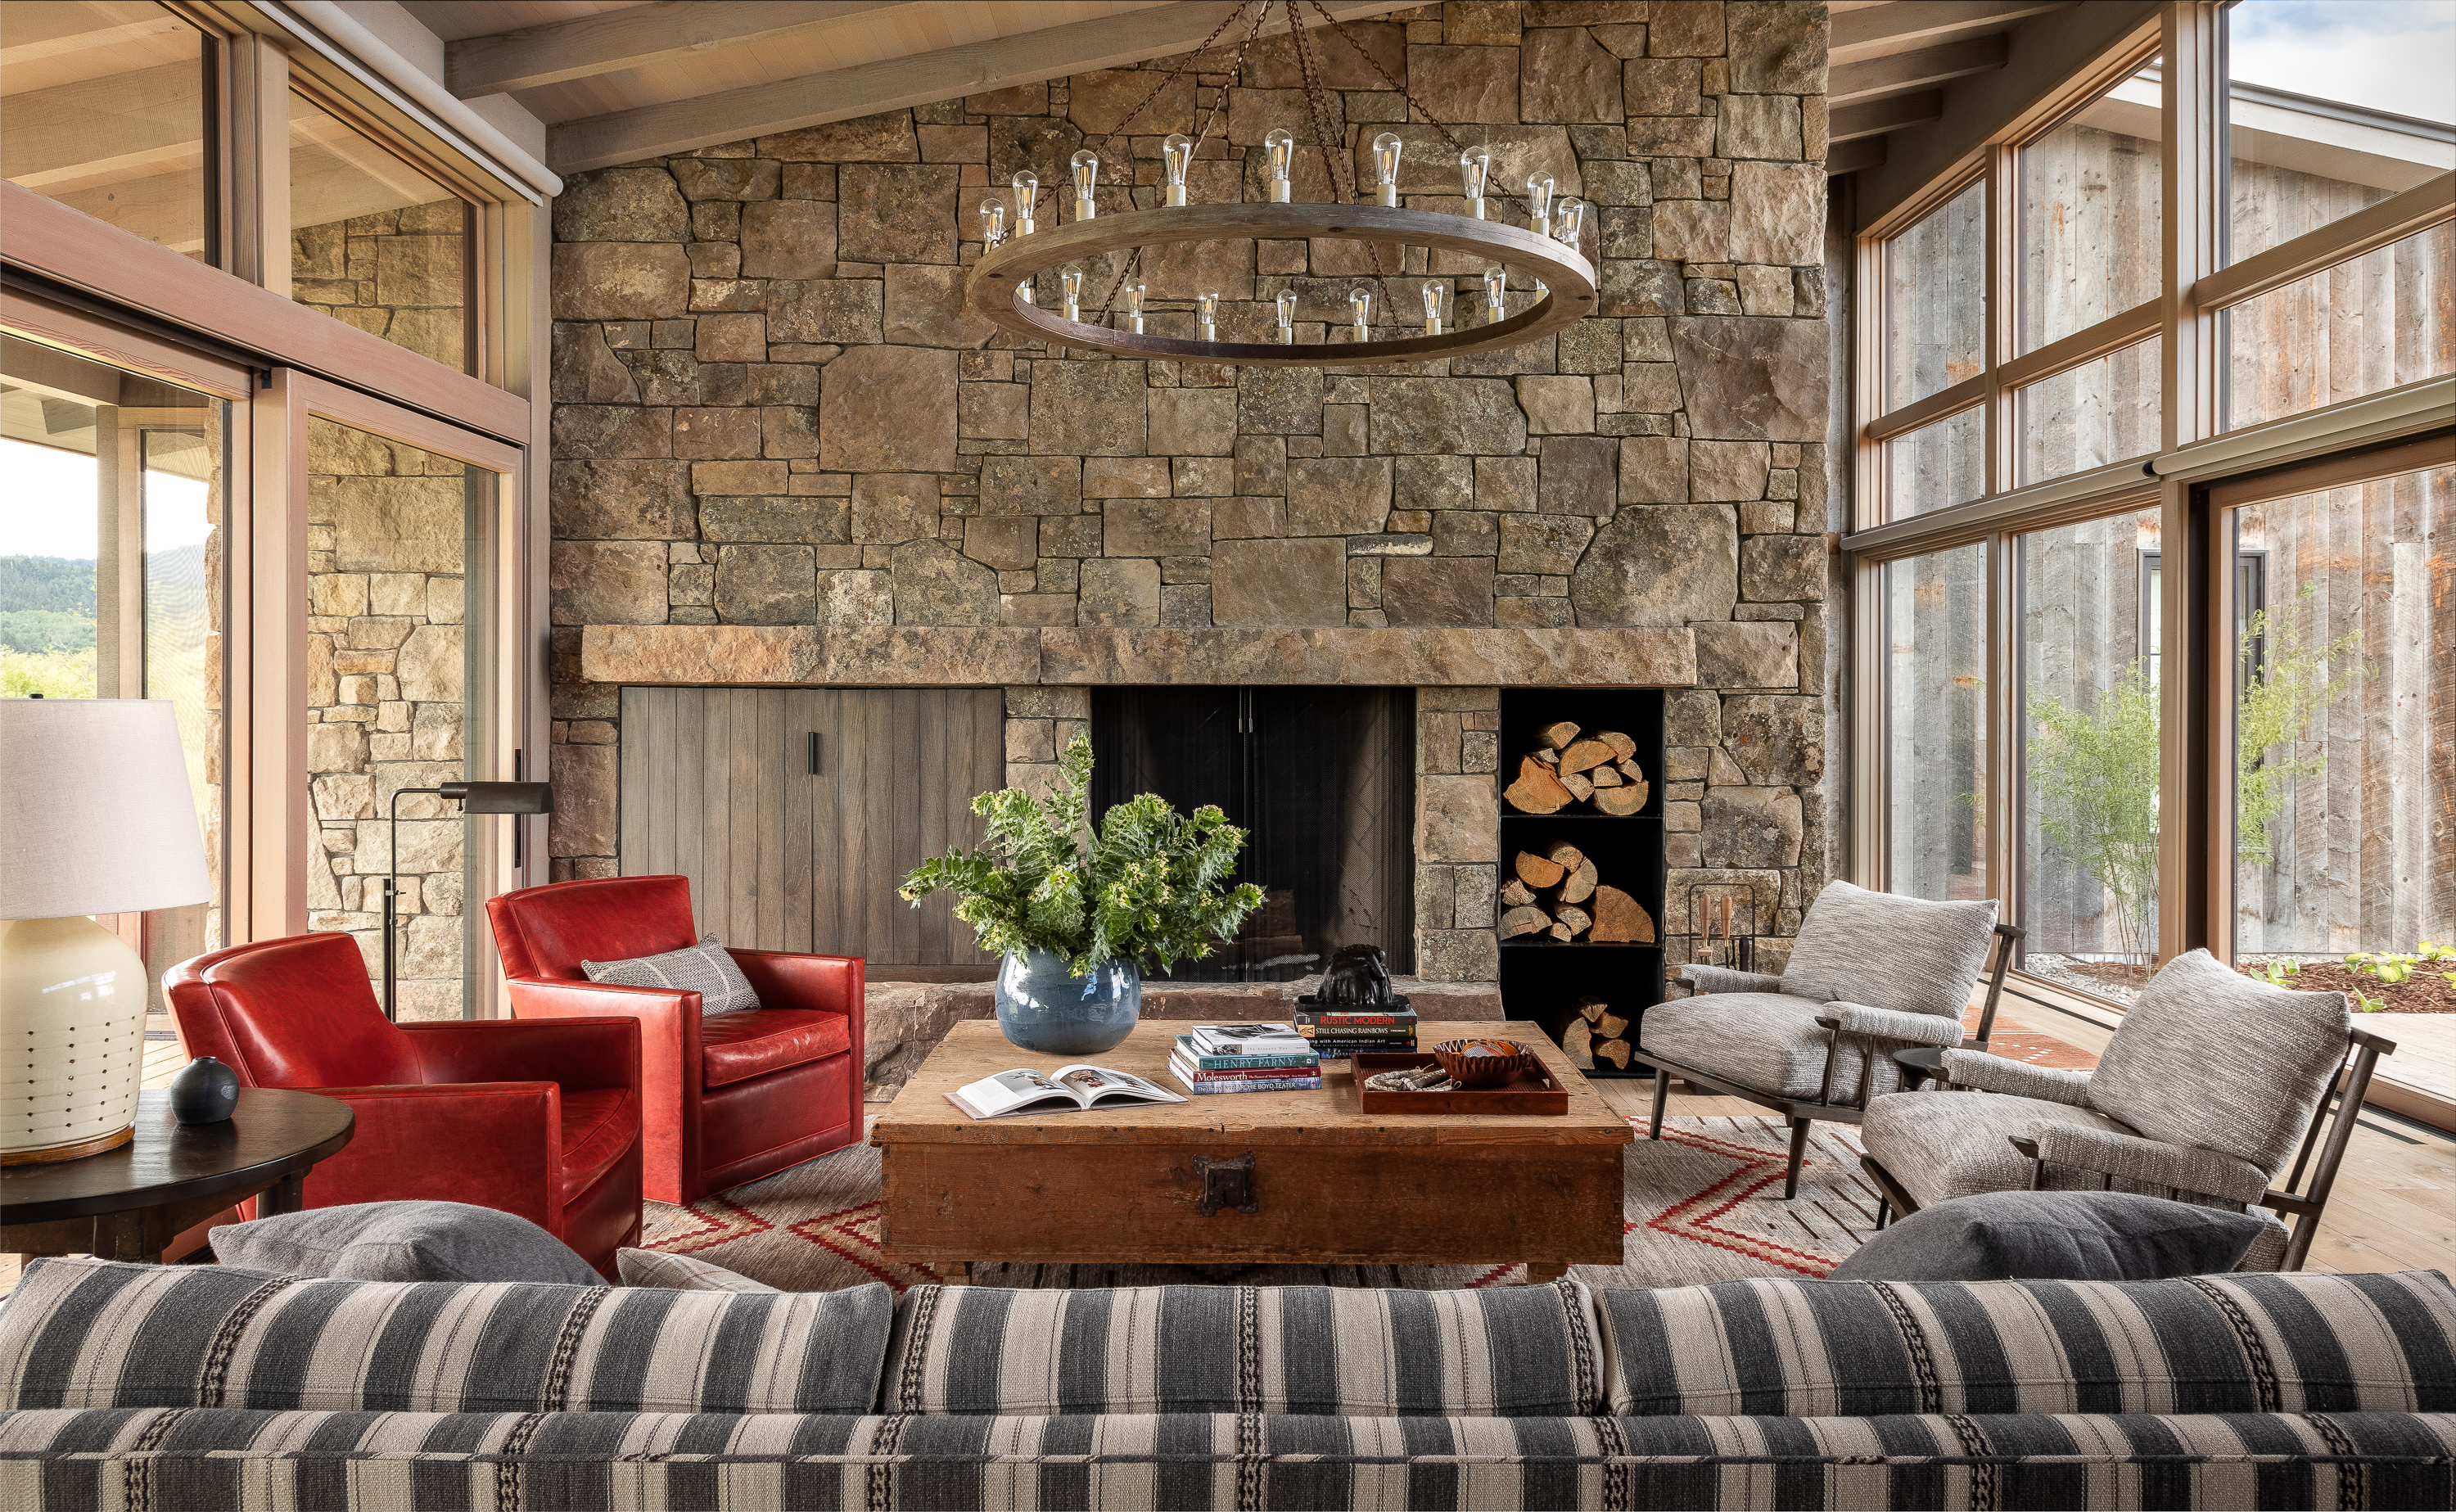 Big Fireplace surround in a rustic modern home.